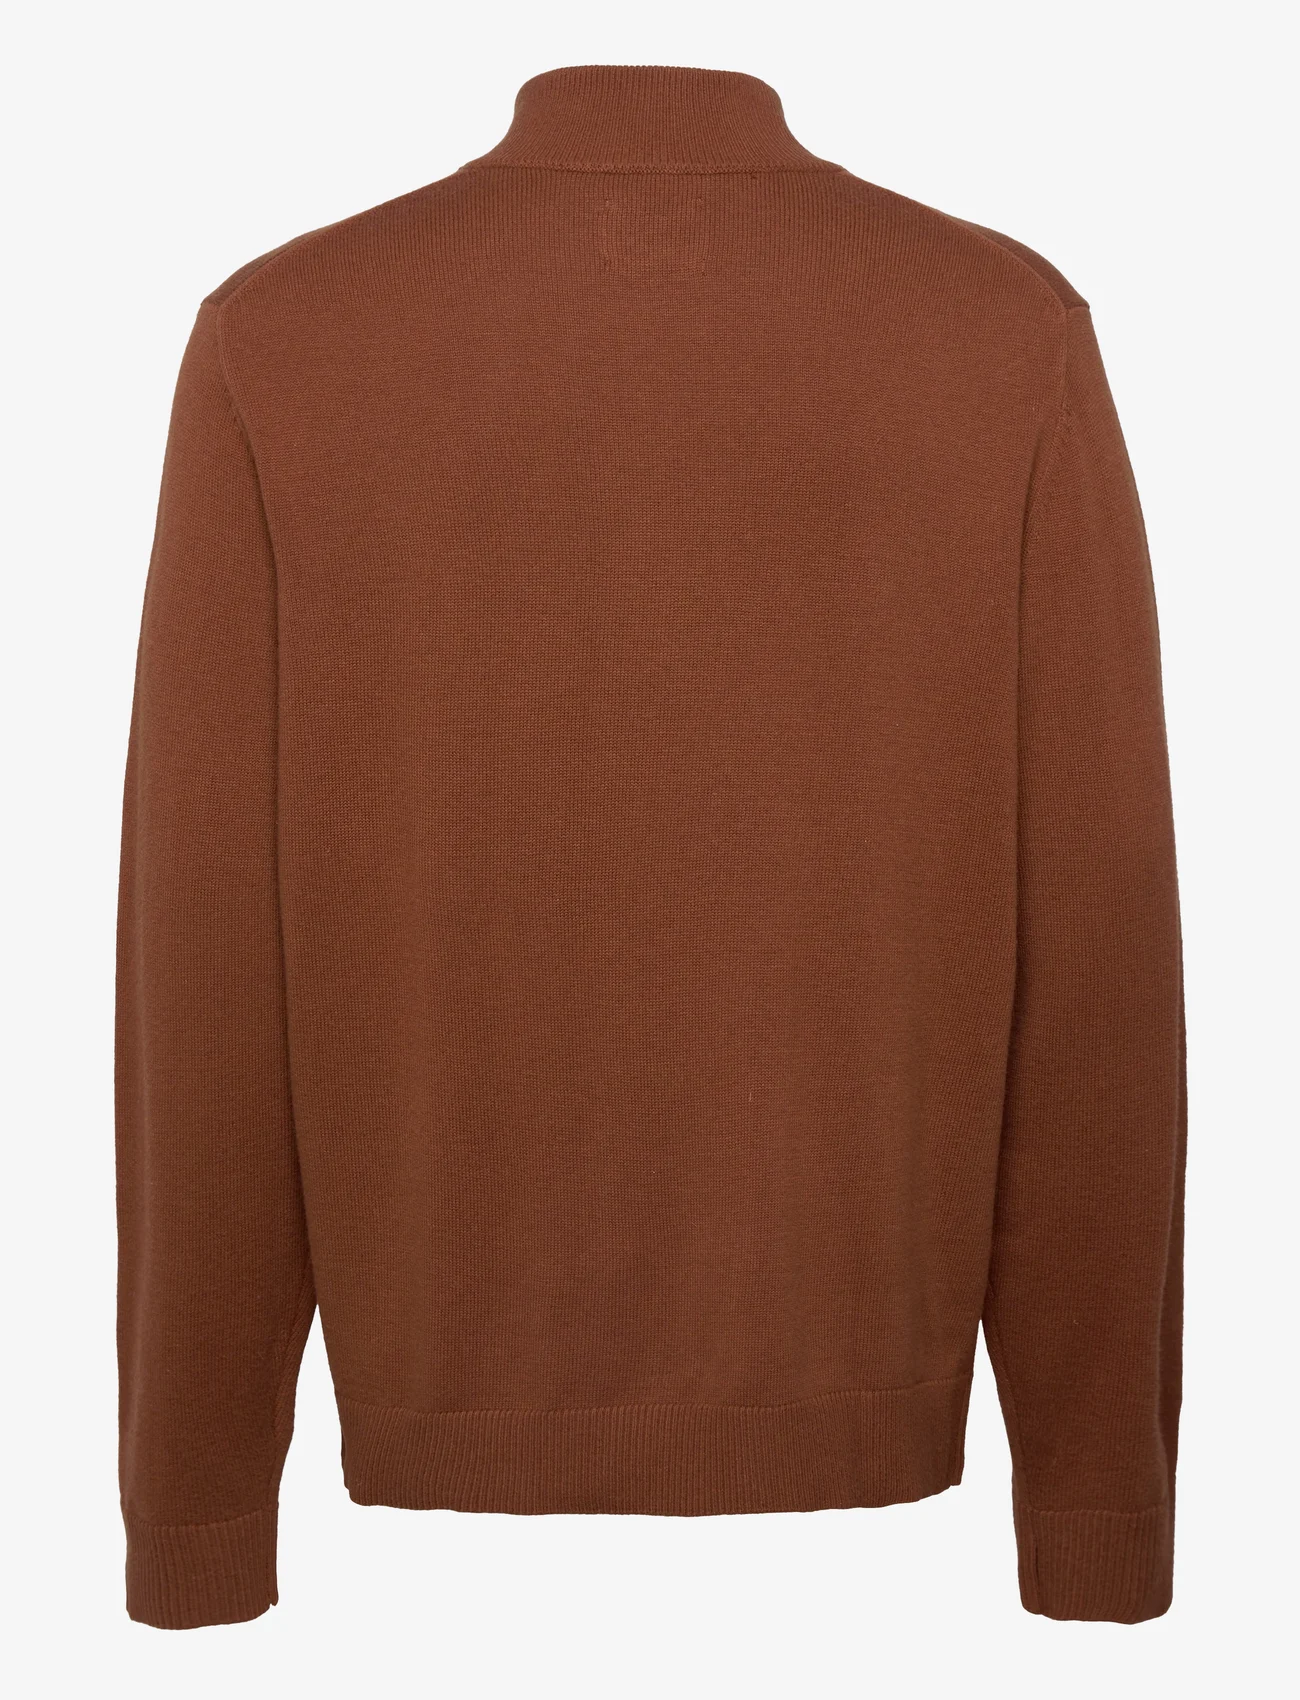 Abercrombie & Fitch - ANF MENS SWEATERS - basic-strickmode - brown - 1